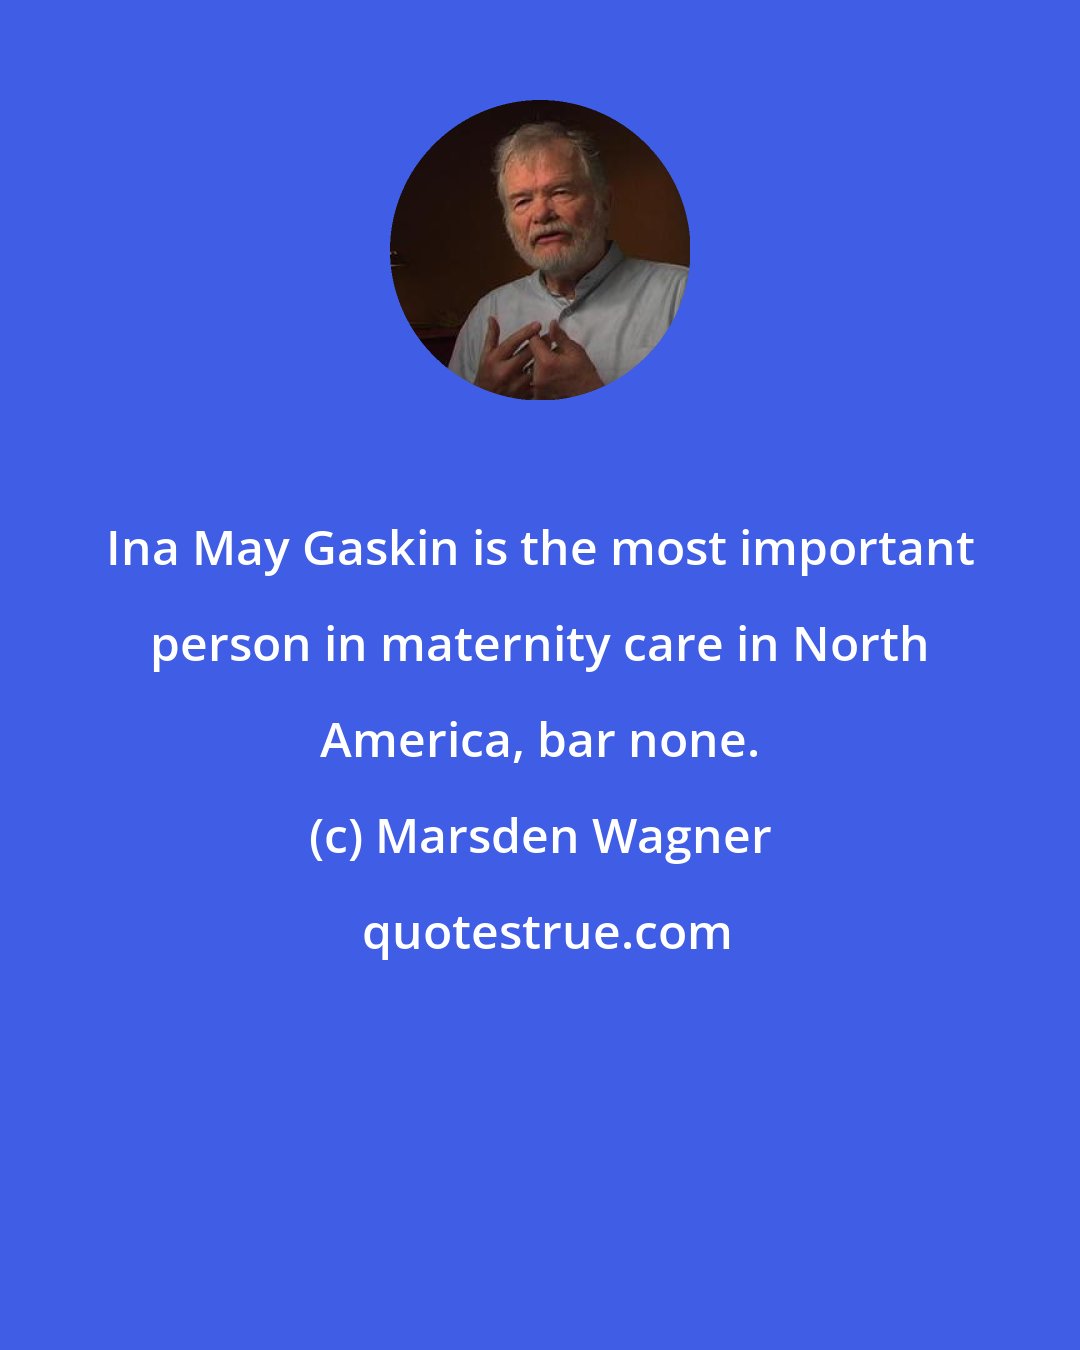 Marsden Wagner: Ina May Gaskin is the most important person in maternity care in North America, bar none.